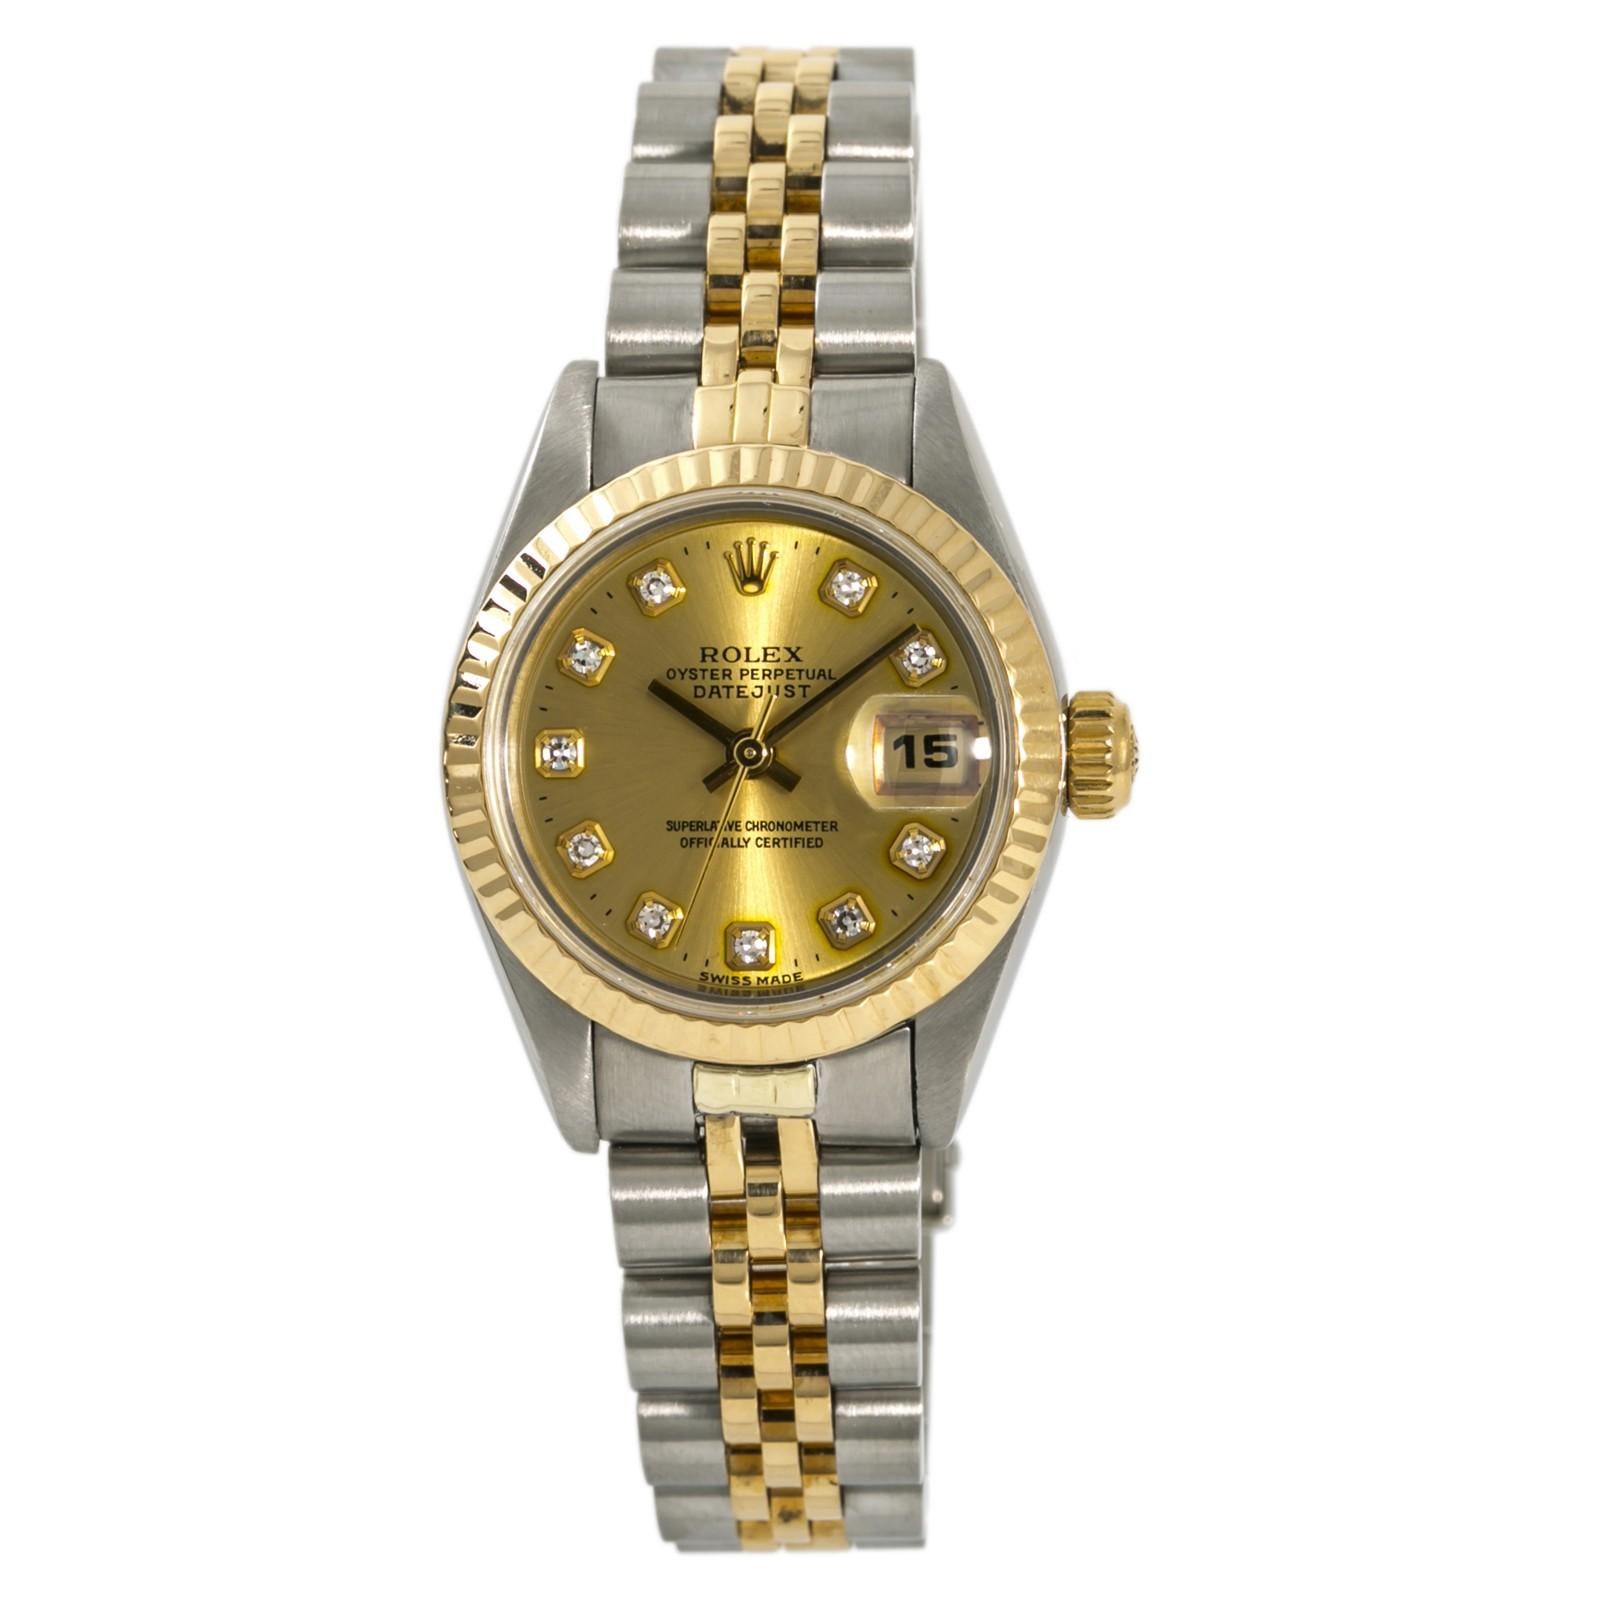 Rolex Datejust 69173 Women’s Automatic Two-Tone Stainless Steel Diamond Dial